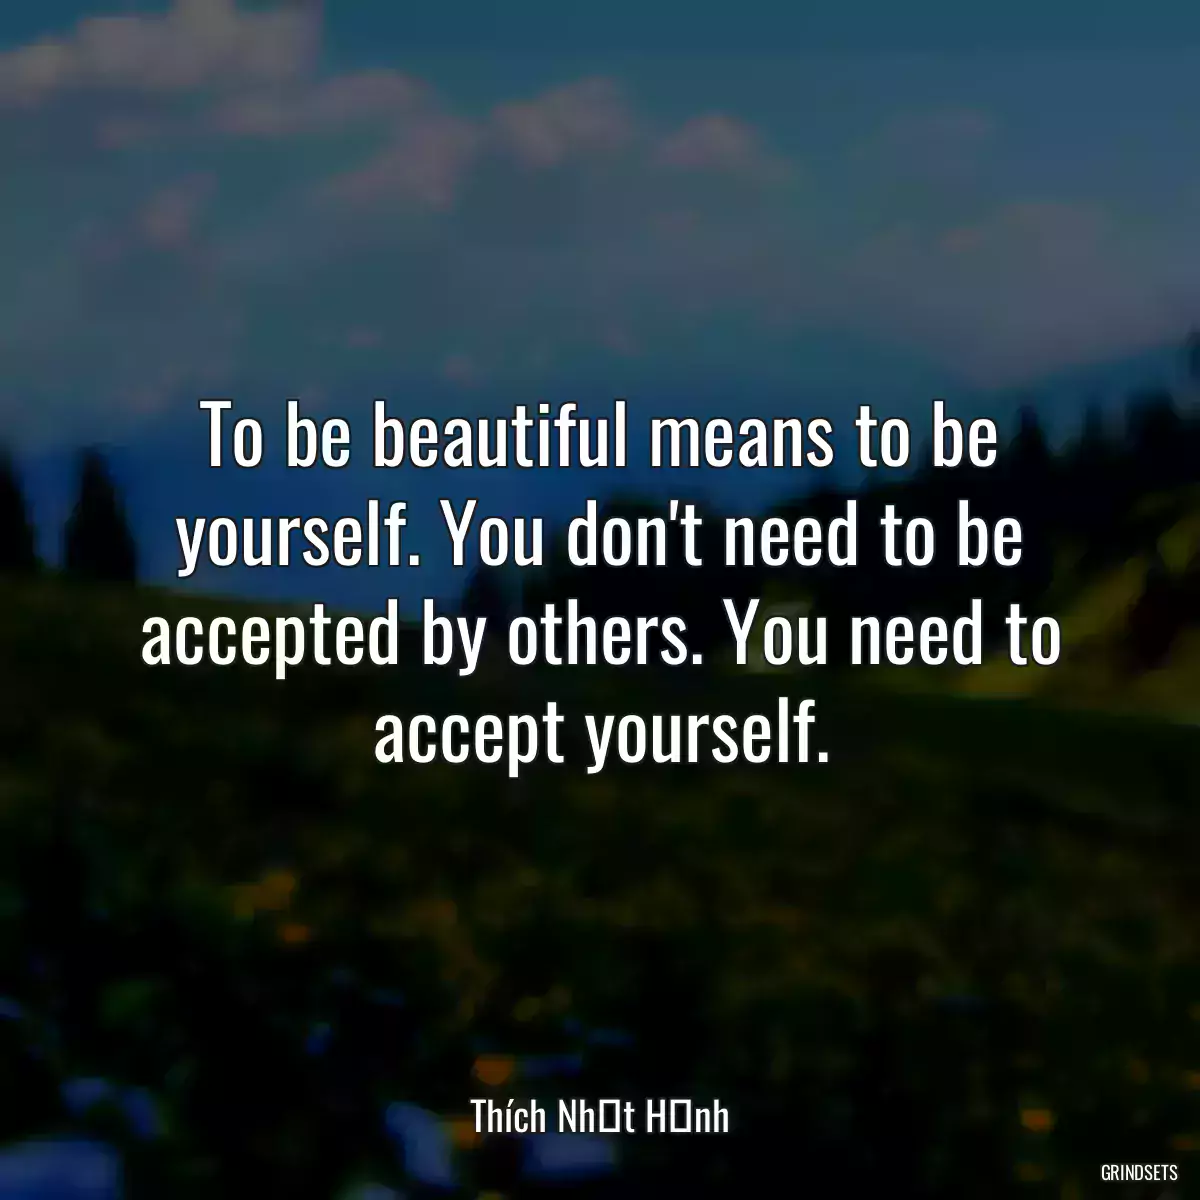 To be beautiful means to be yourself. You don\'t need to be accepted by others. You need to accept yourself.